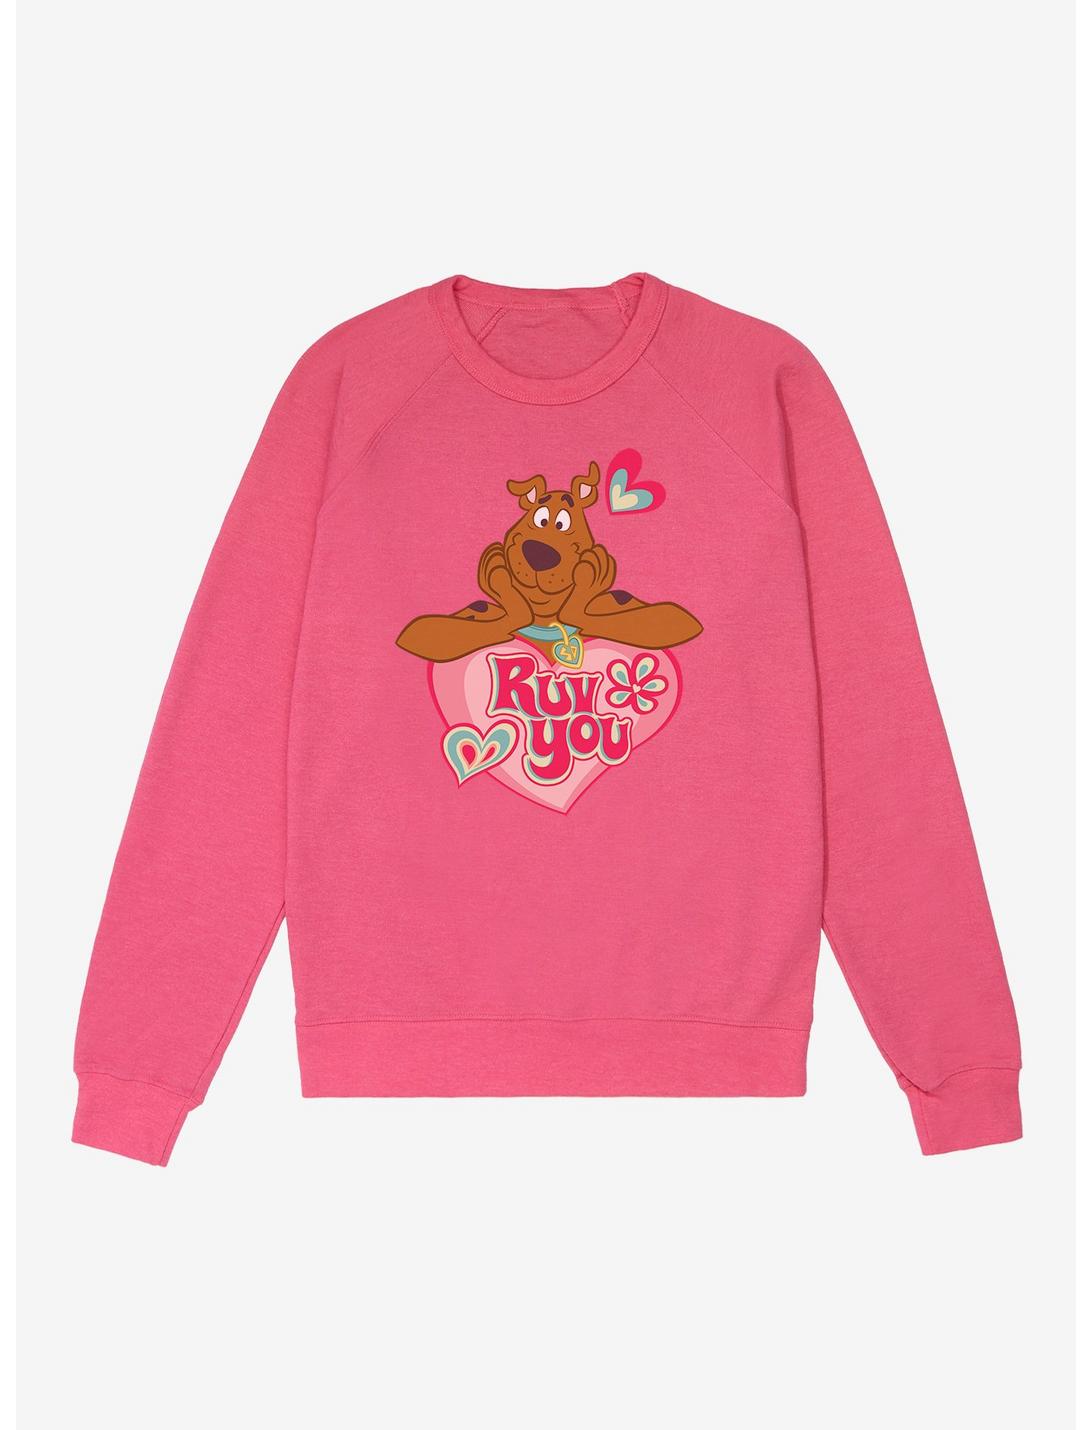 Scooby-Doo Ruv You French Terry Sweatshirt, HELICONIA HEATHER, hi-res